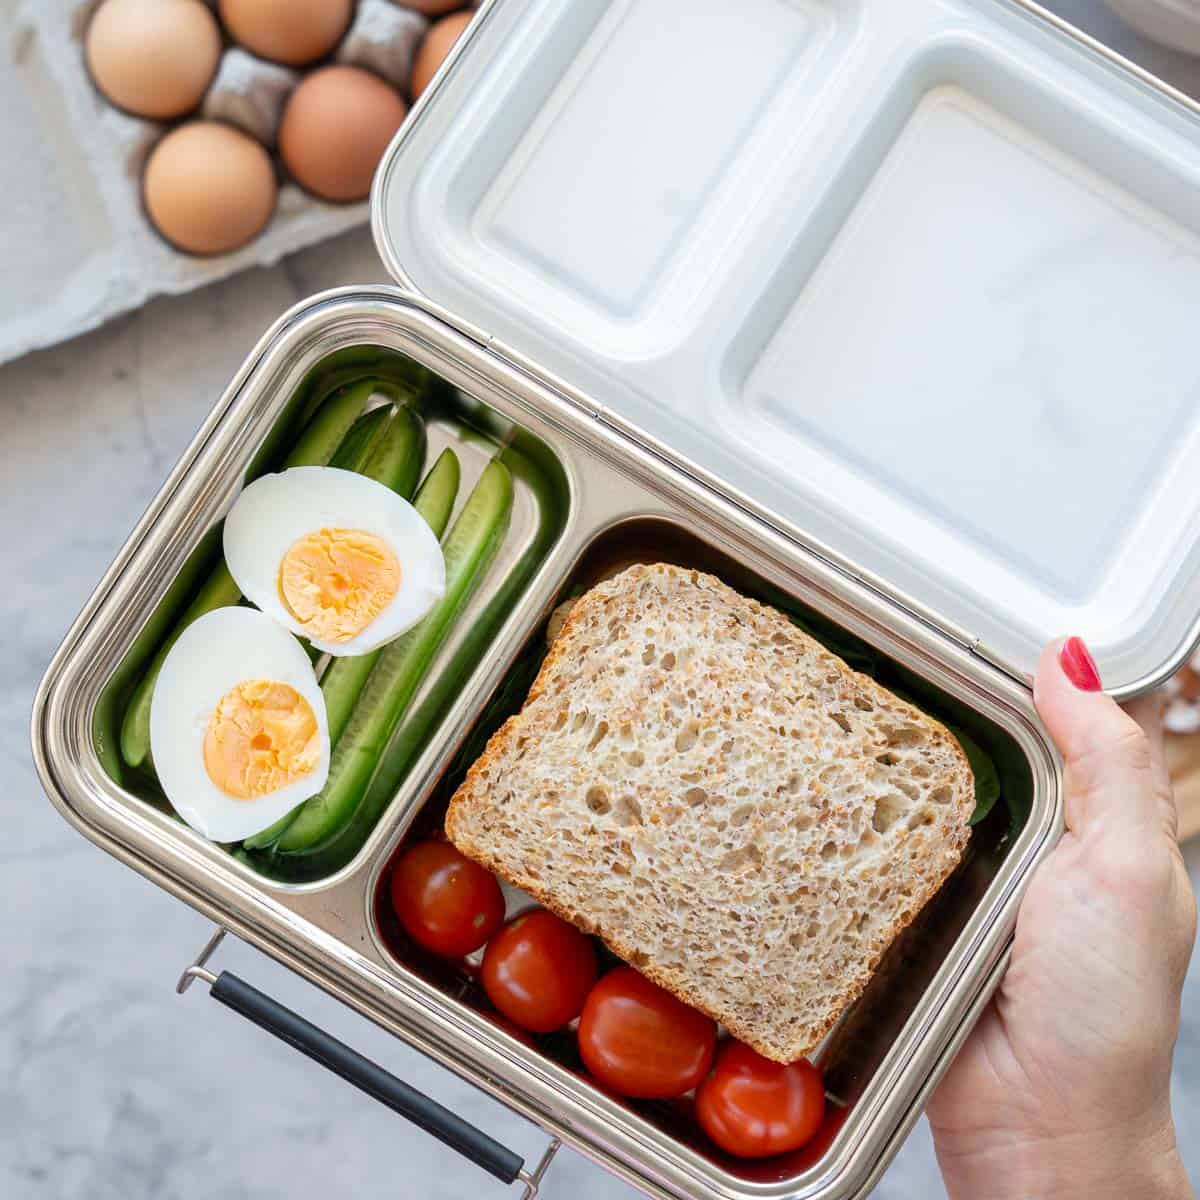 A stainless steel lunch box packed with a sandwich, cucumber sticks and a hard boiled egg cut in half.